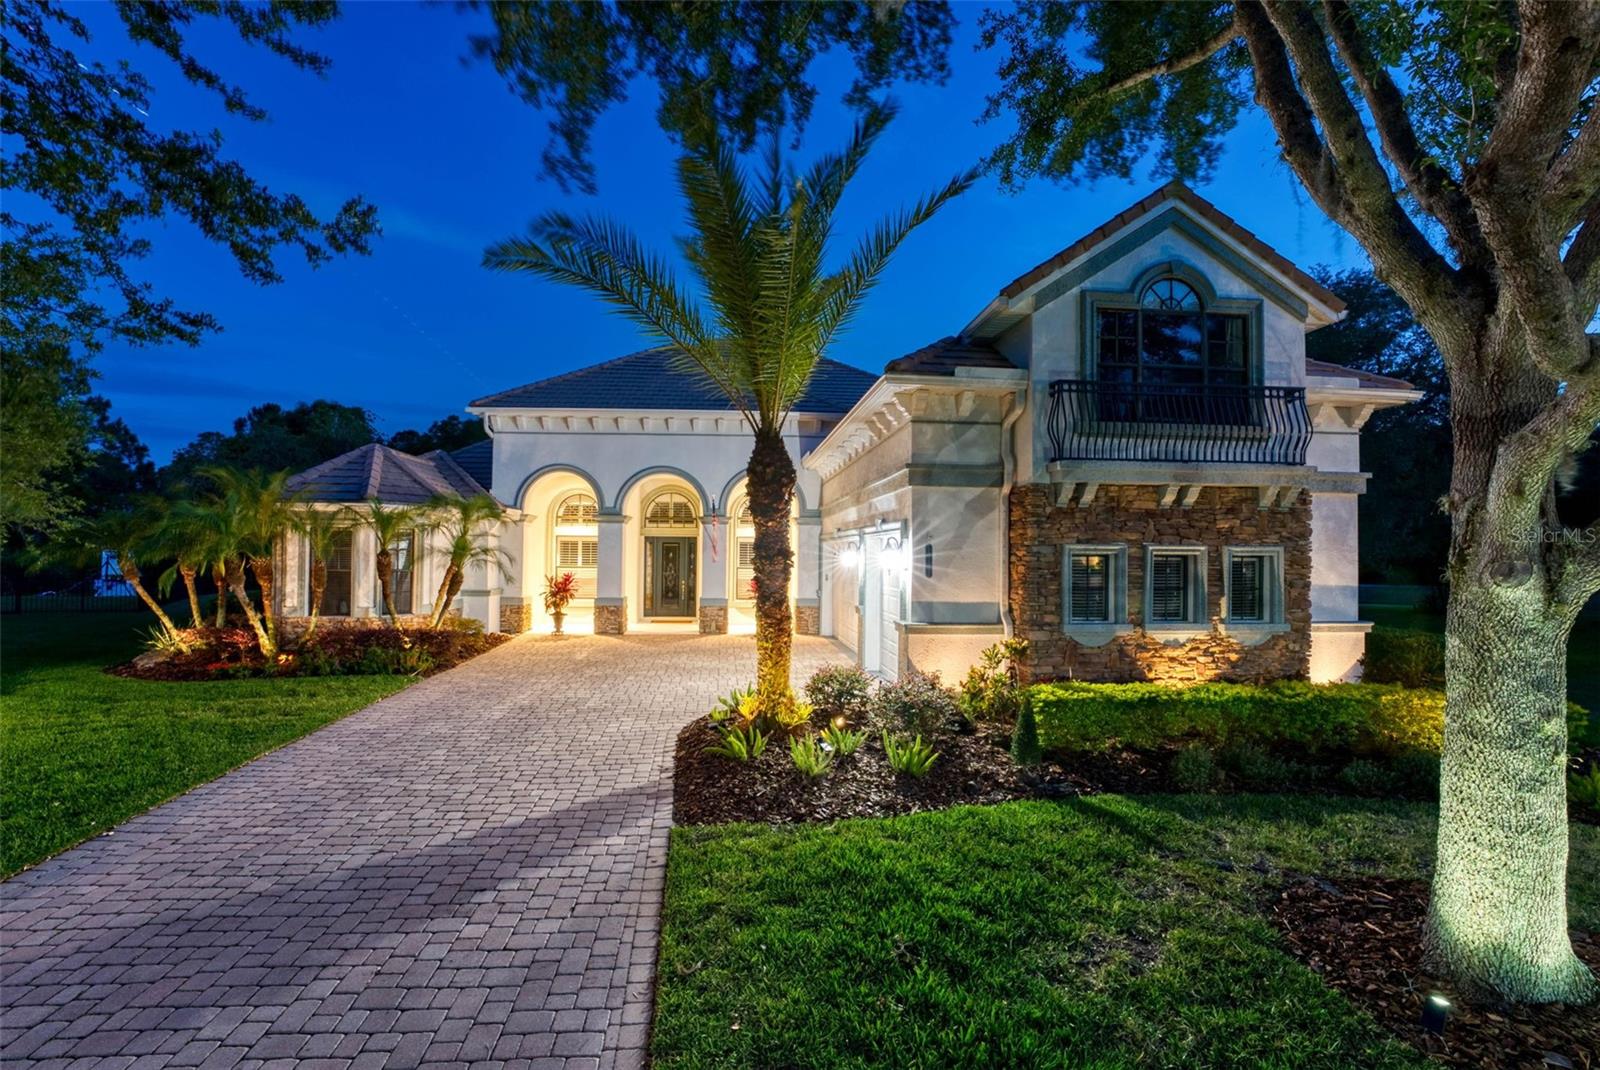 ADMIRE SUNSETS OVER THE WATER IN YOUR EXQUISITE WATERFRONT HOME WITH AWESOME TILE BARREL ROOF!